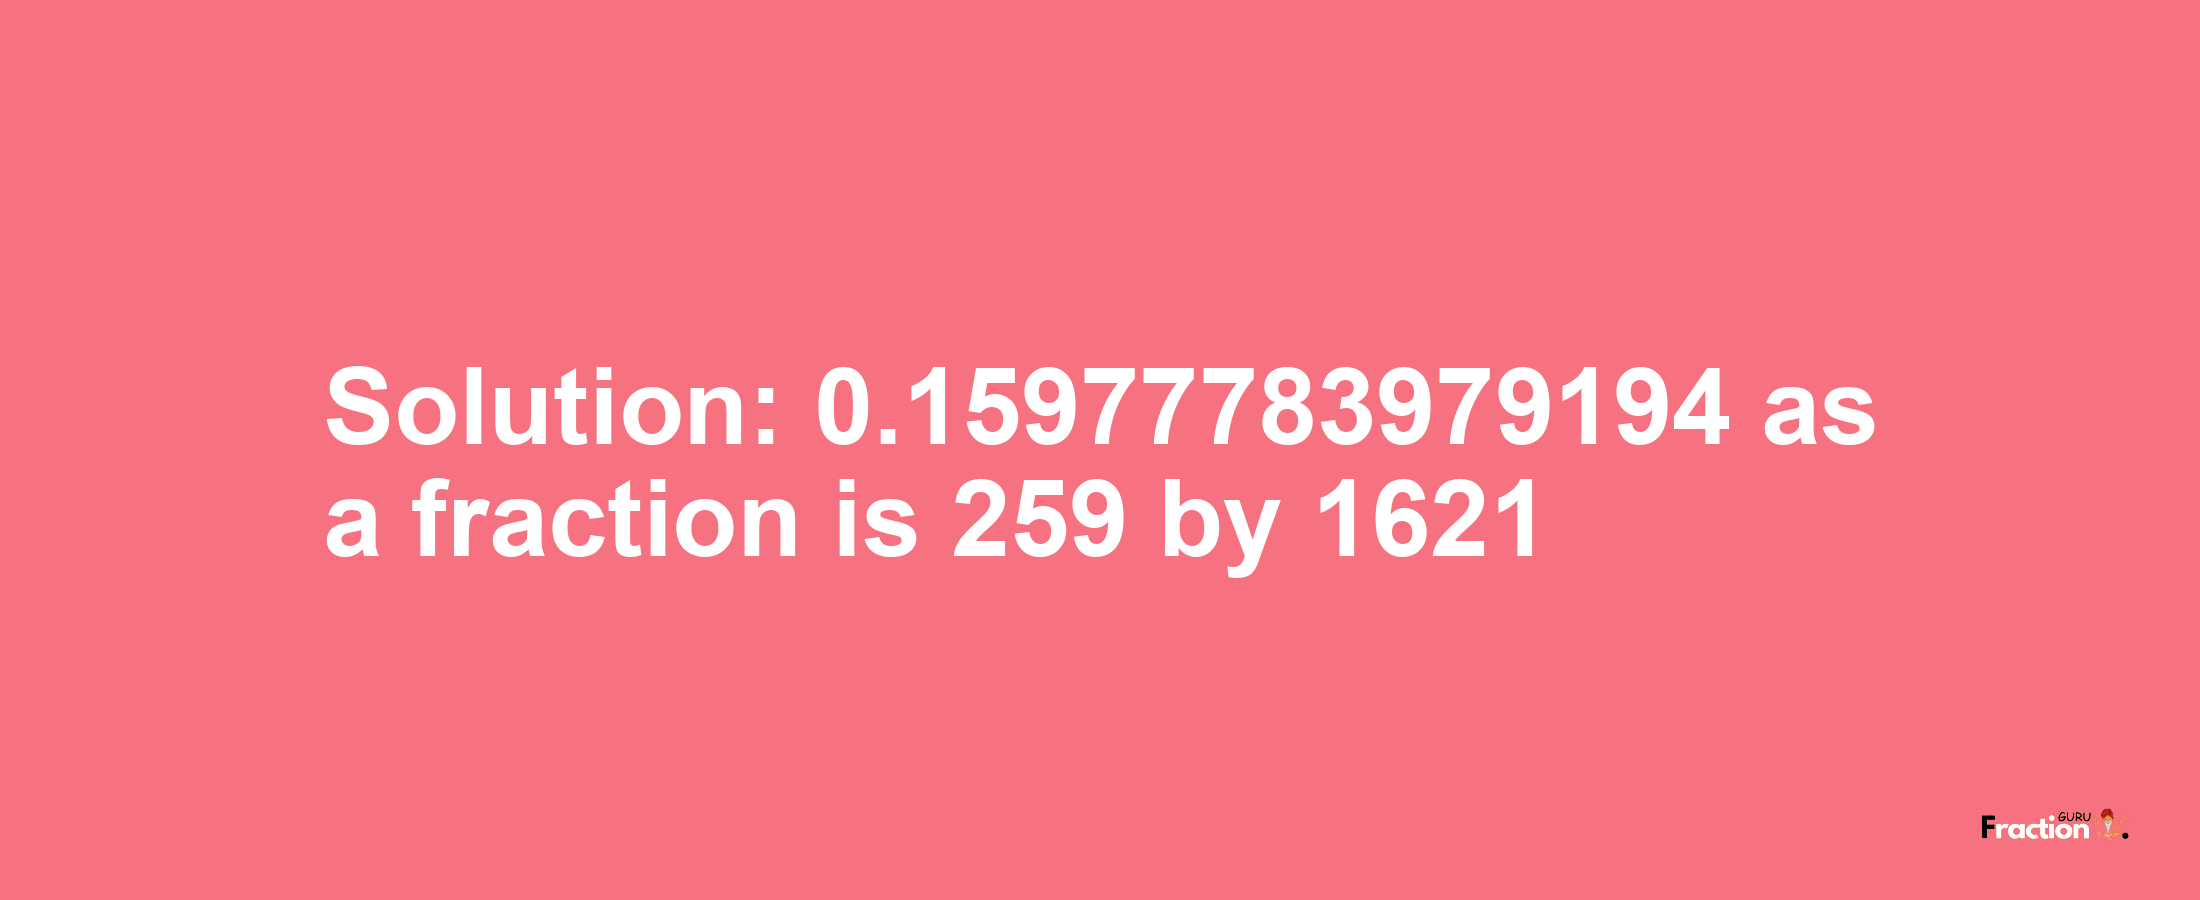 Solution:0.15977783979194 as a fraction is 259/1621